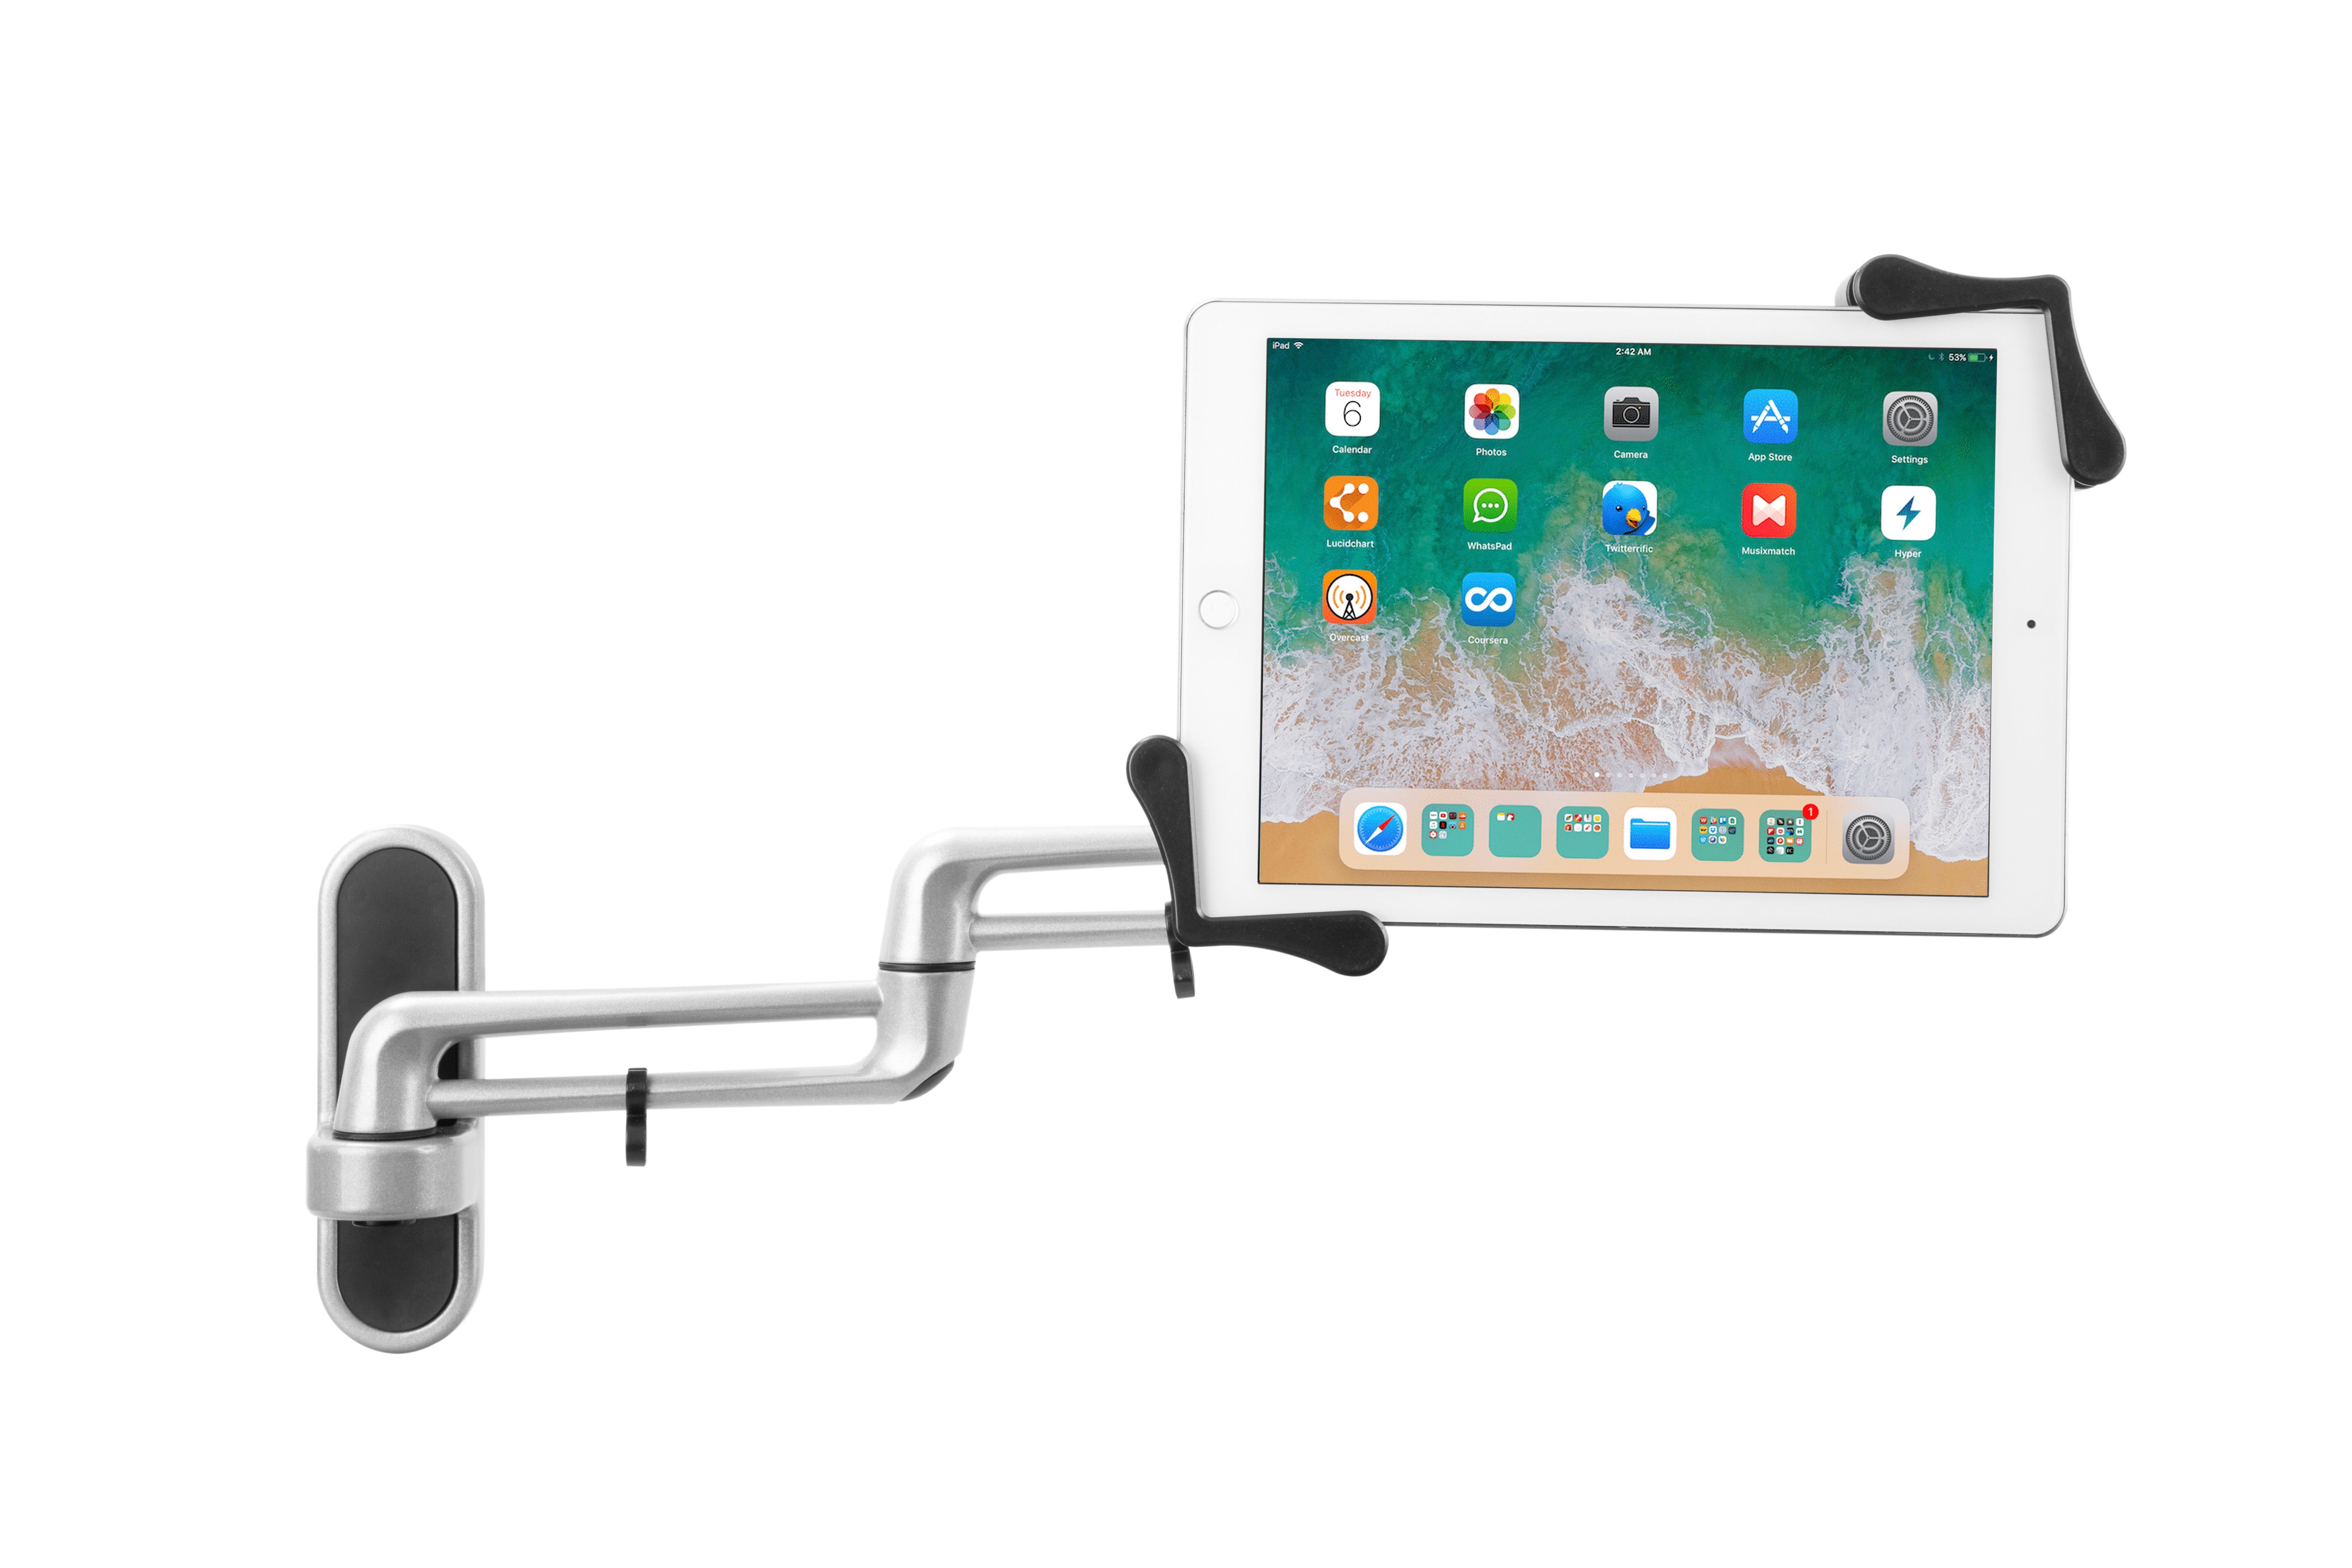 Articulating Tablet Wall Mount for 7 - 13 inch Tablets